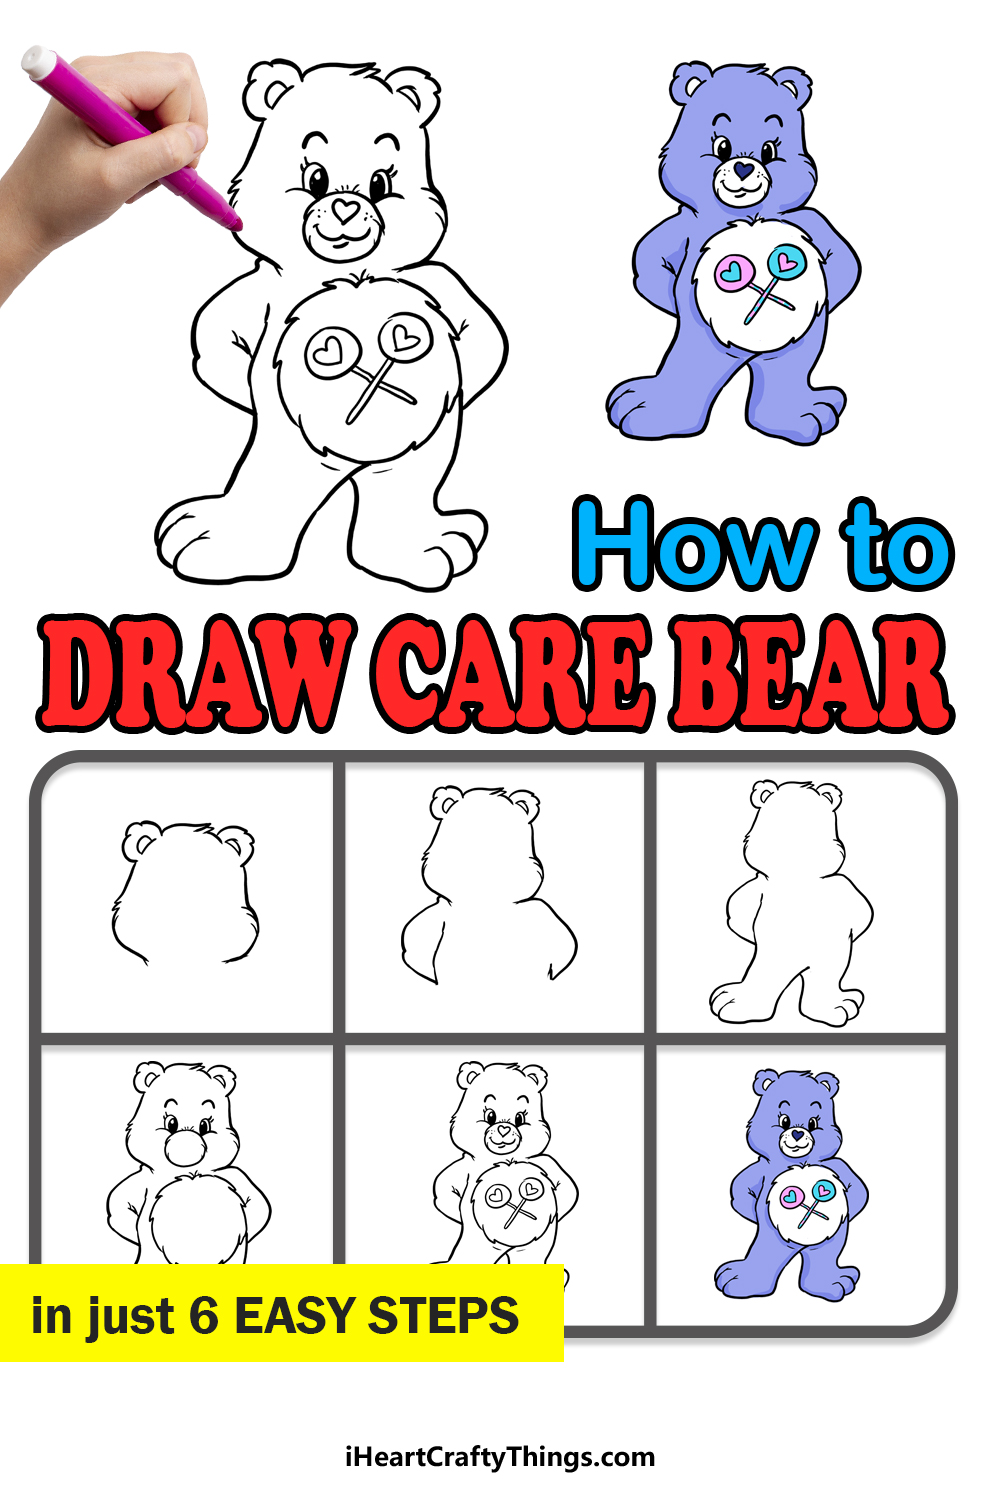 How to Draw A Care Bear step by step guide